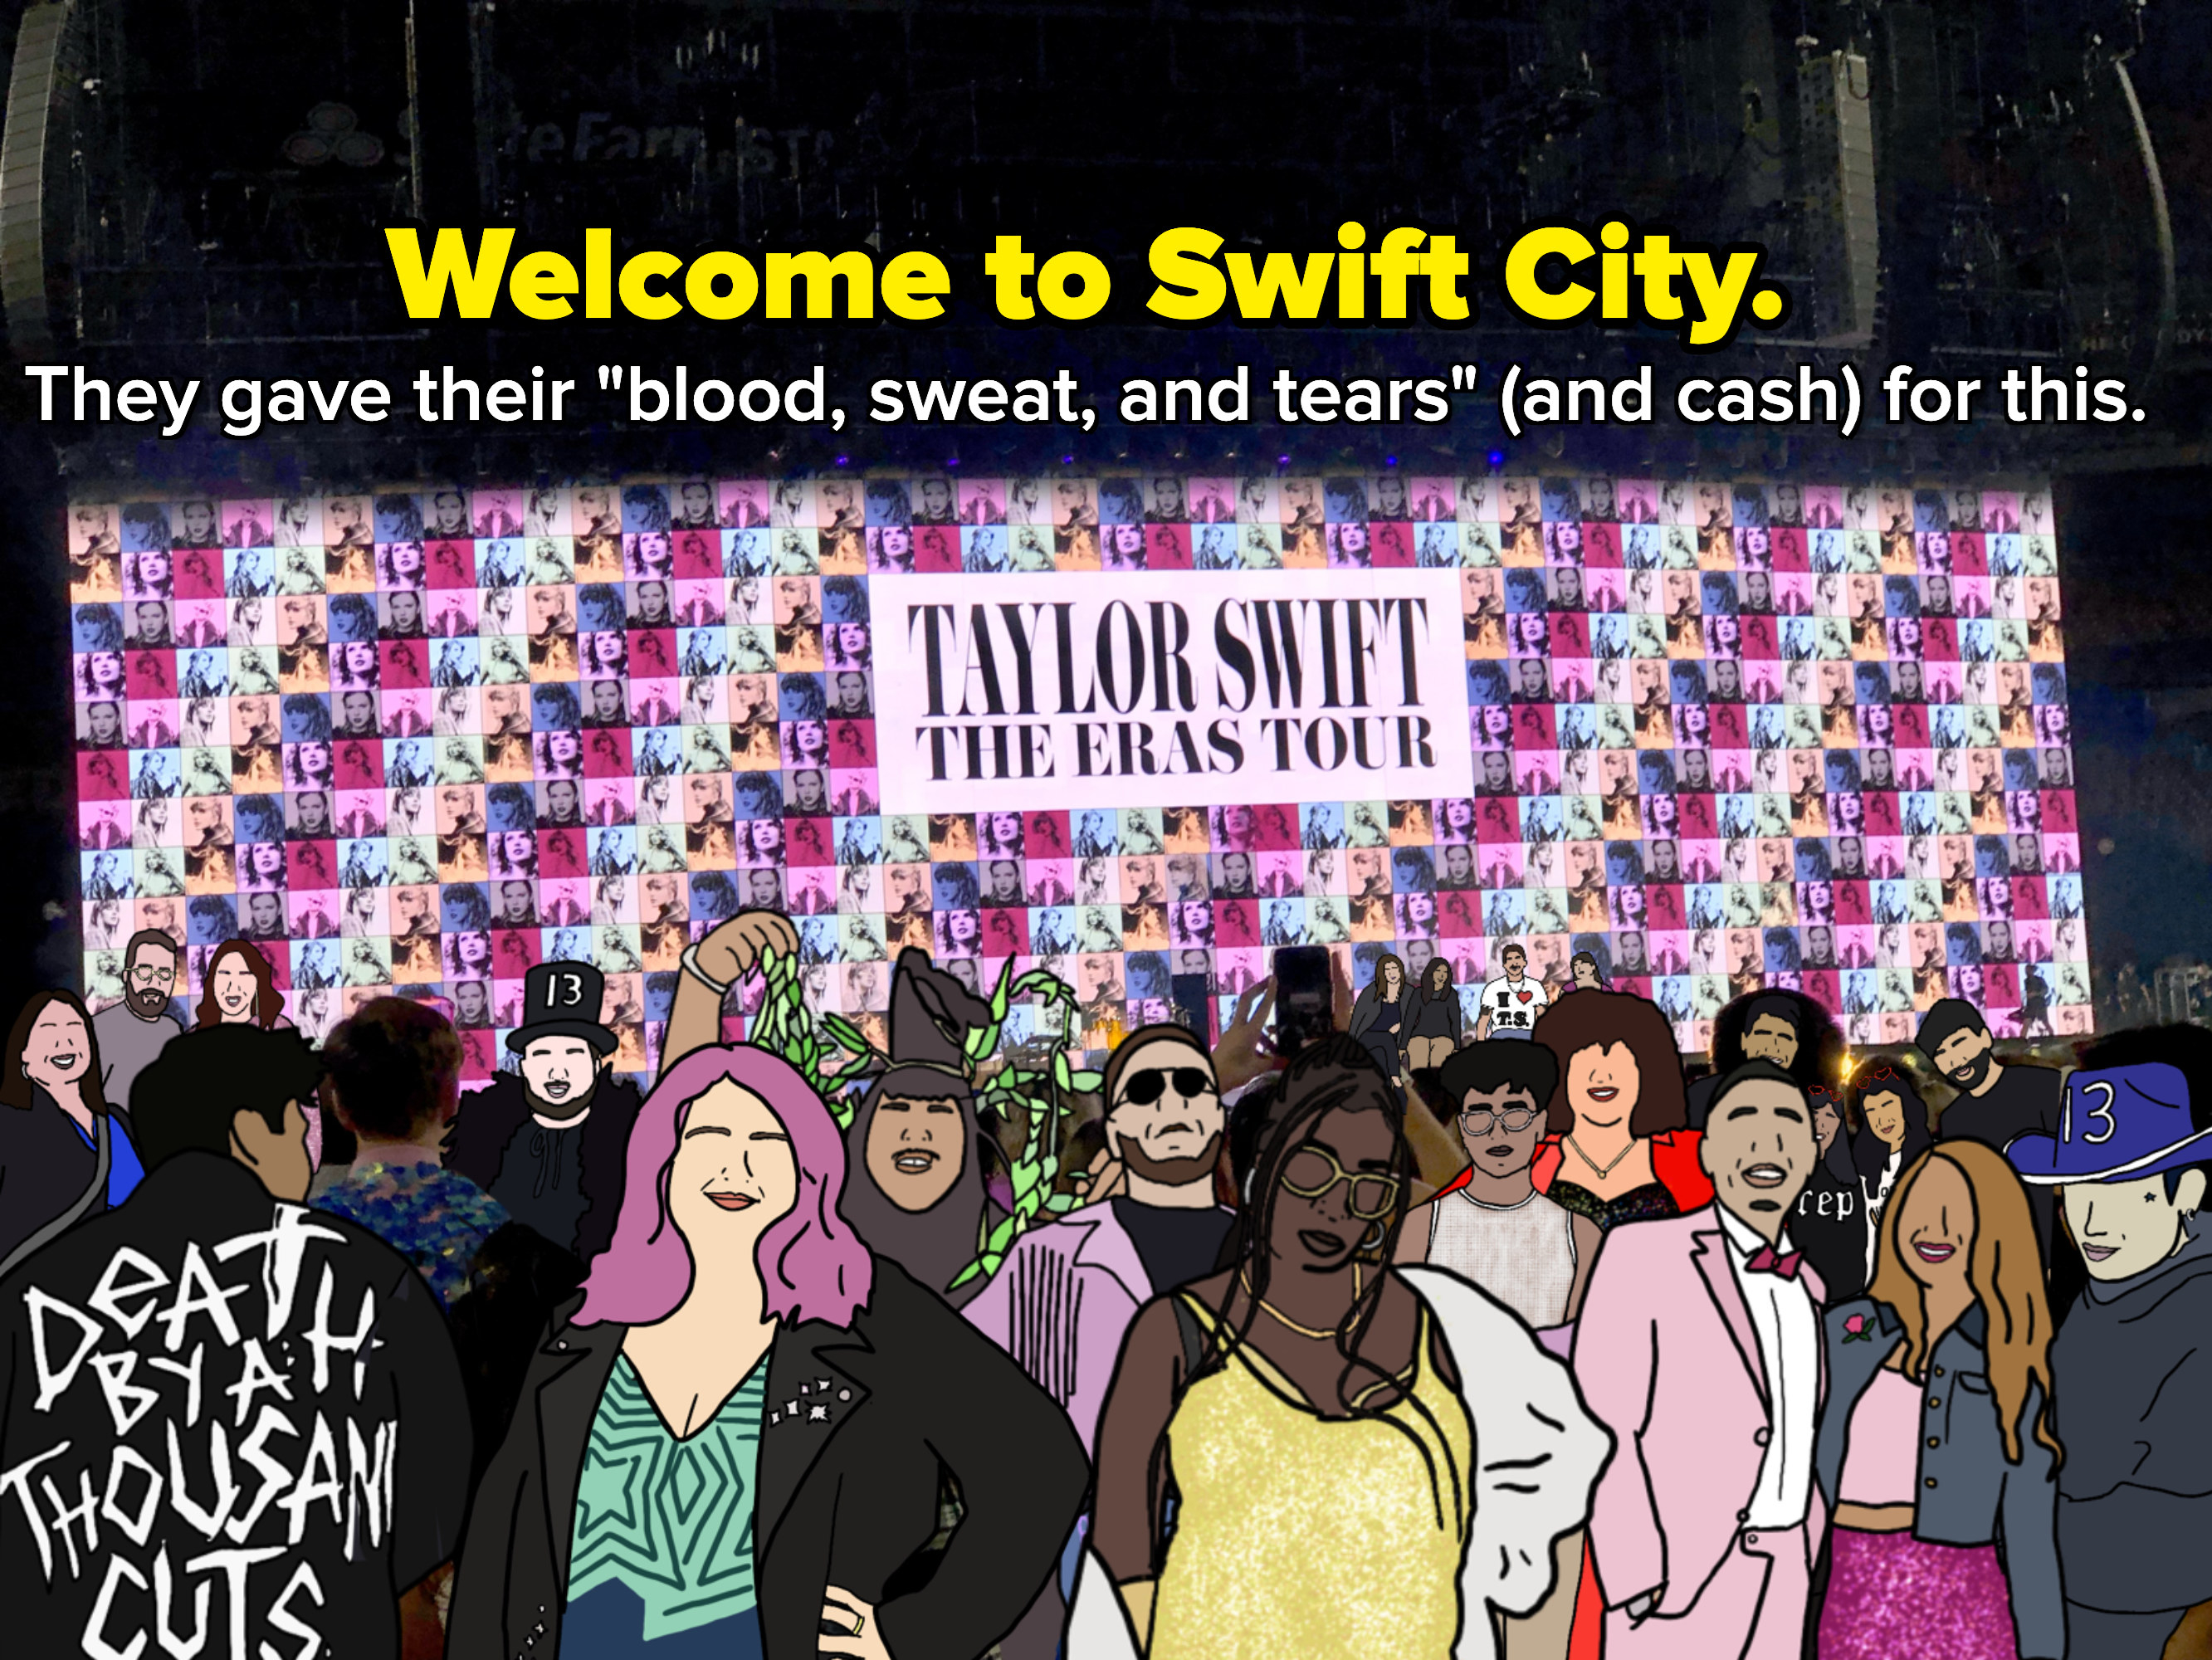 Welcome to Swift City: Eras Tour Stops Are Celebrating Taylor Swift